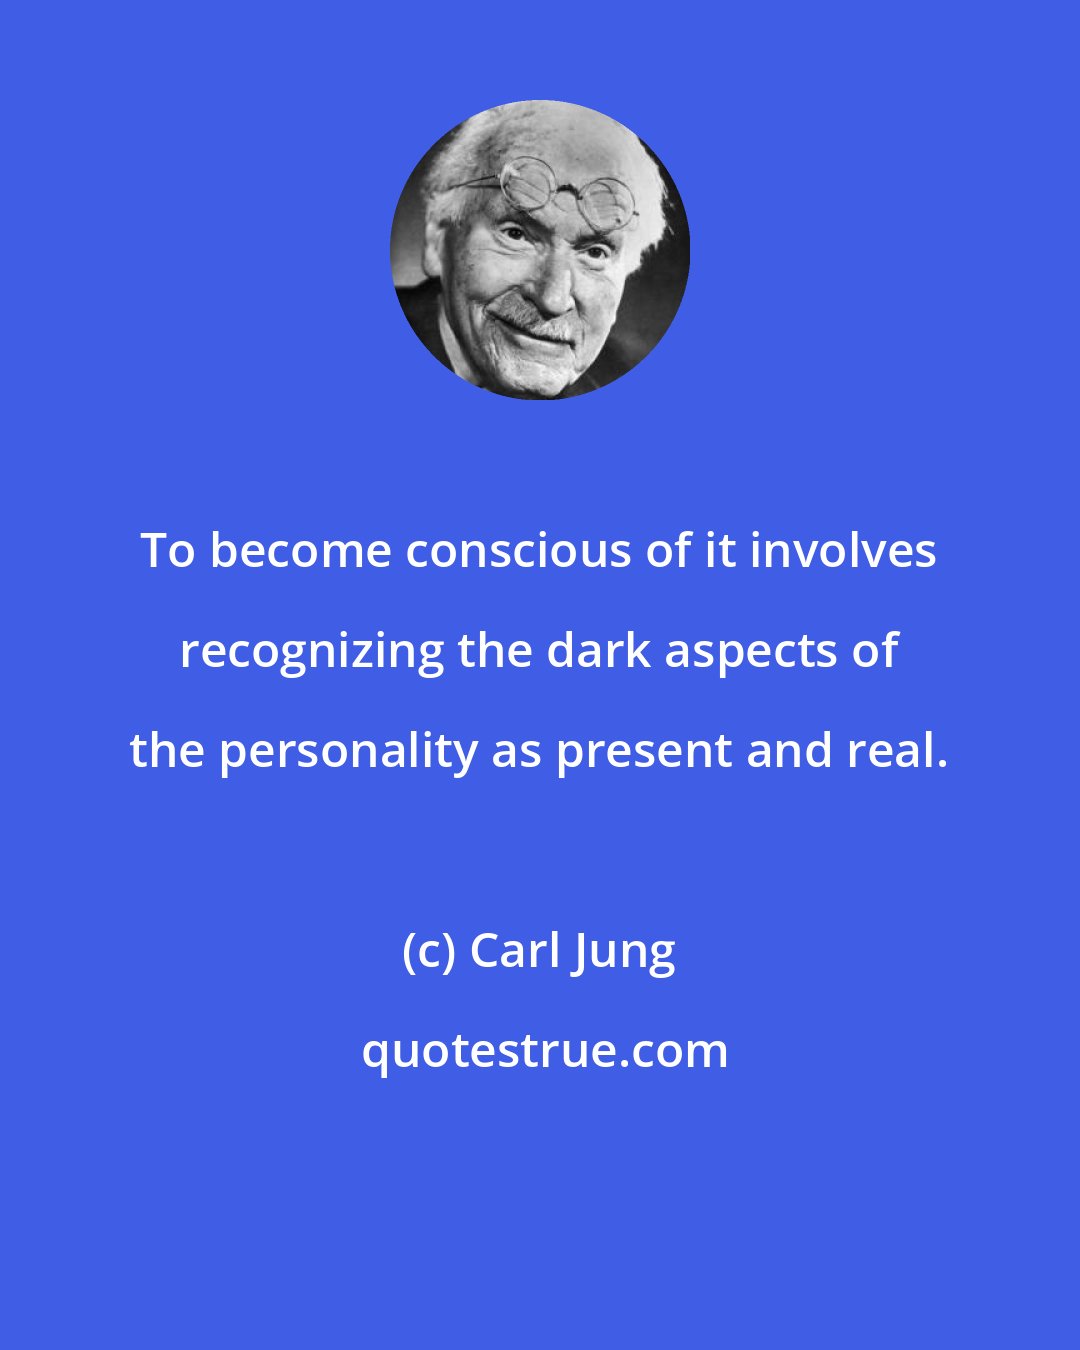 Carl Jung: To become conscious of it involves recognizing the dark aspects of the personality as present and real.